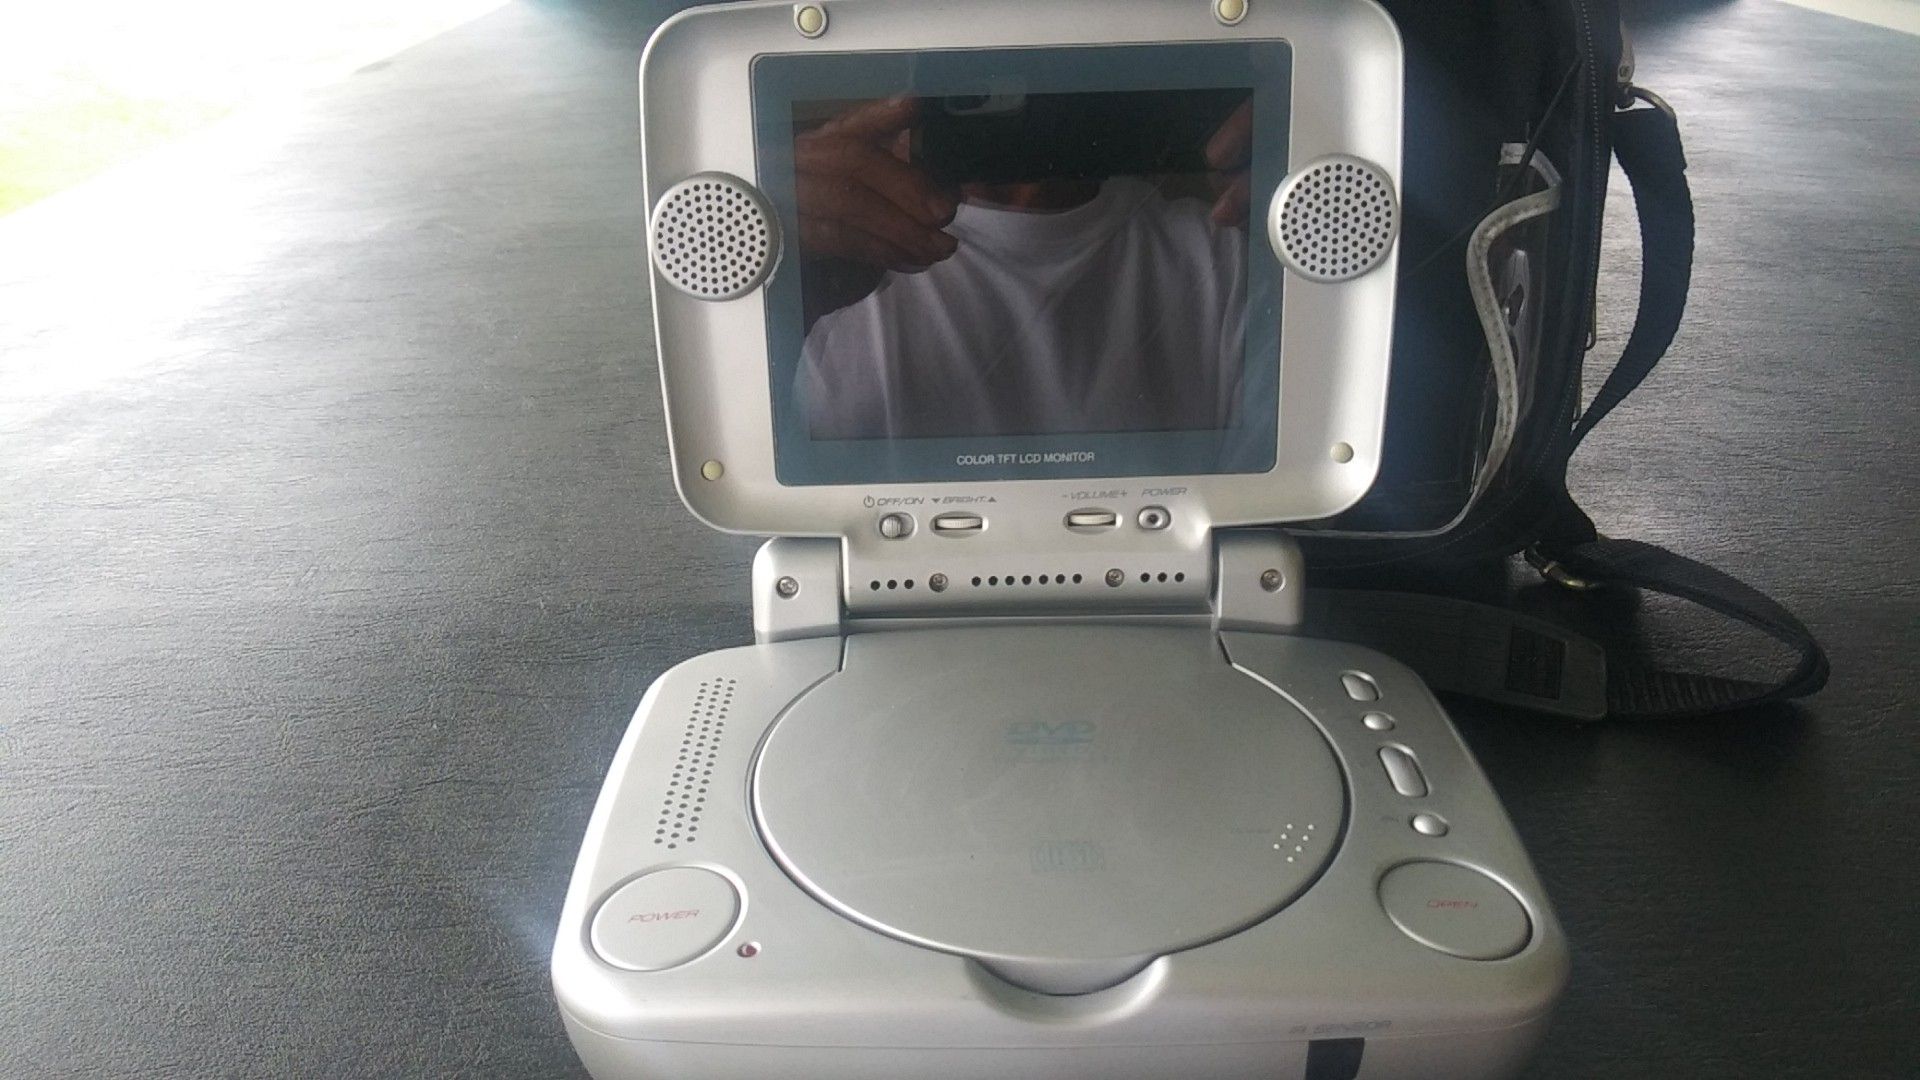 DVD player and you can play games with this to